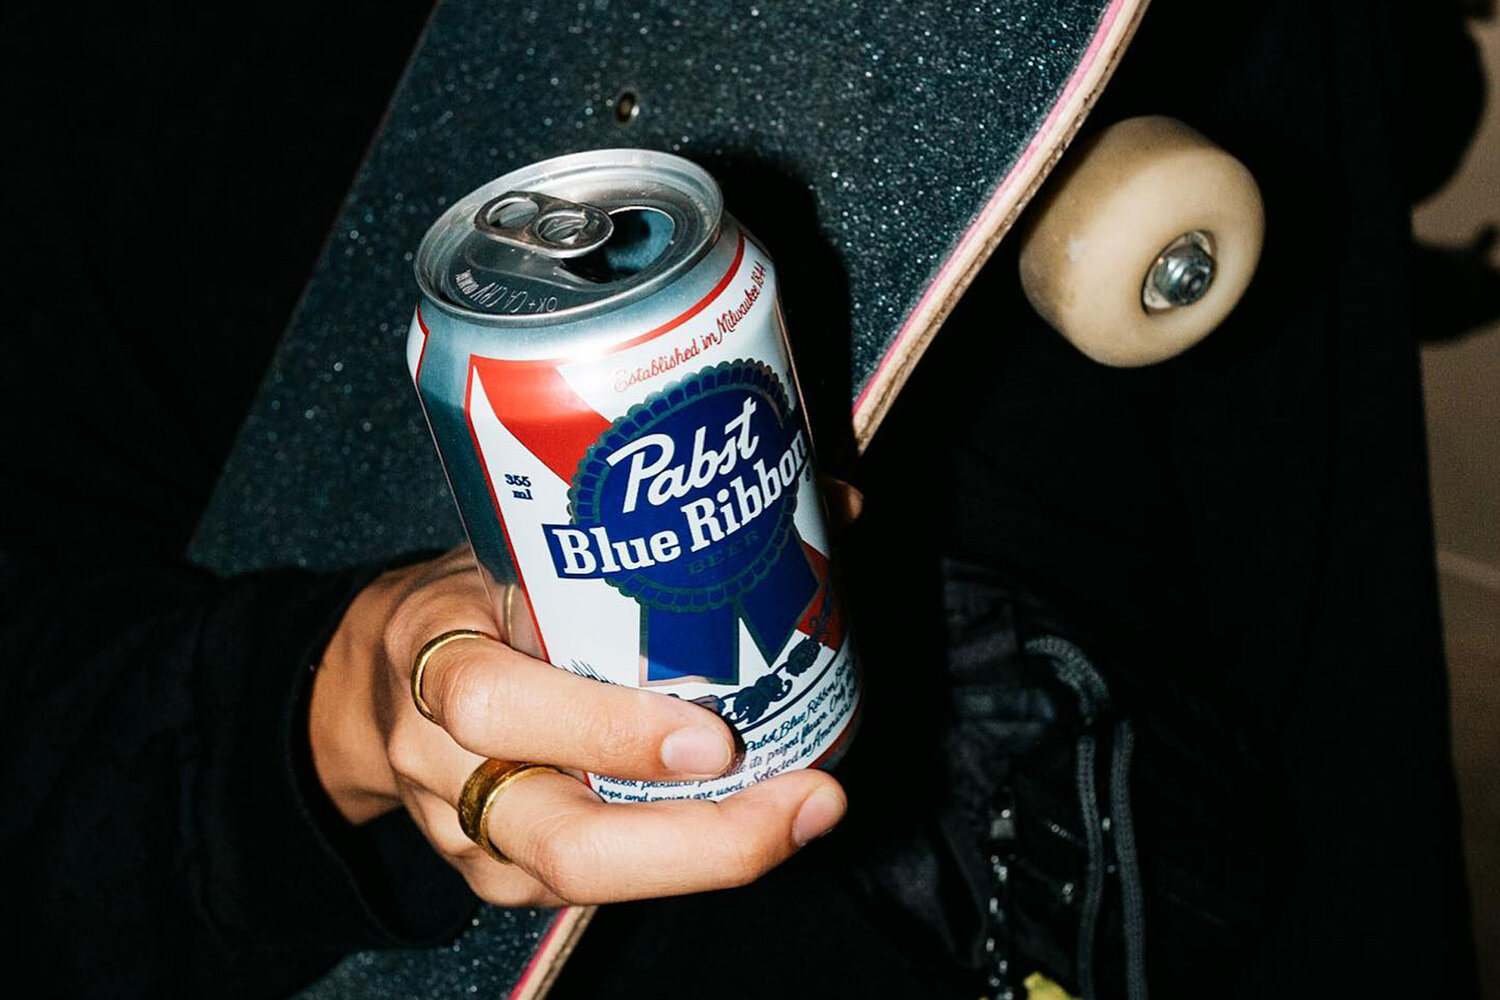 A hand holding a pabst blue ribbon beer.